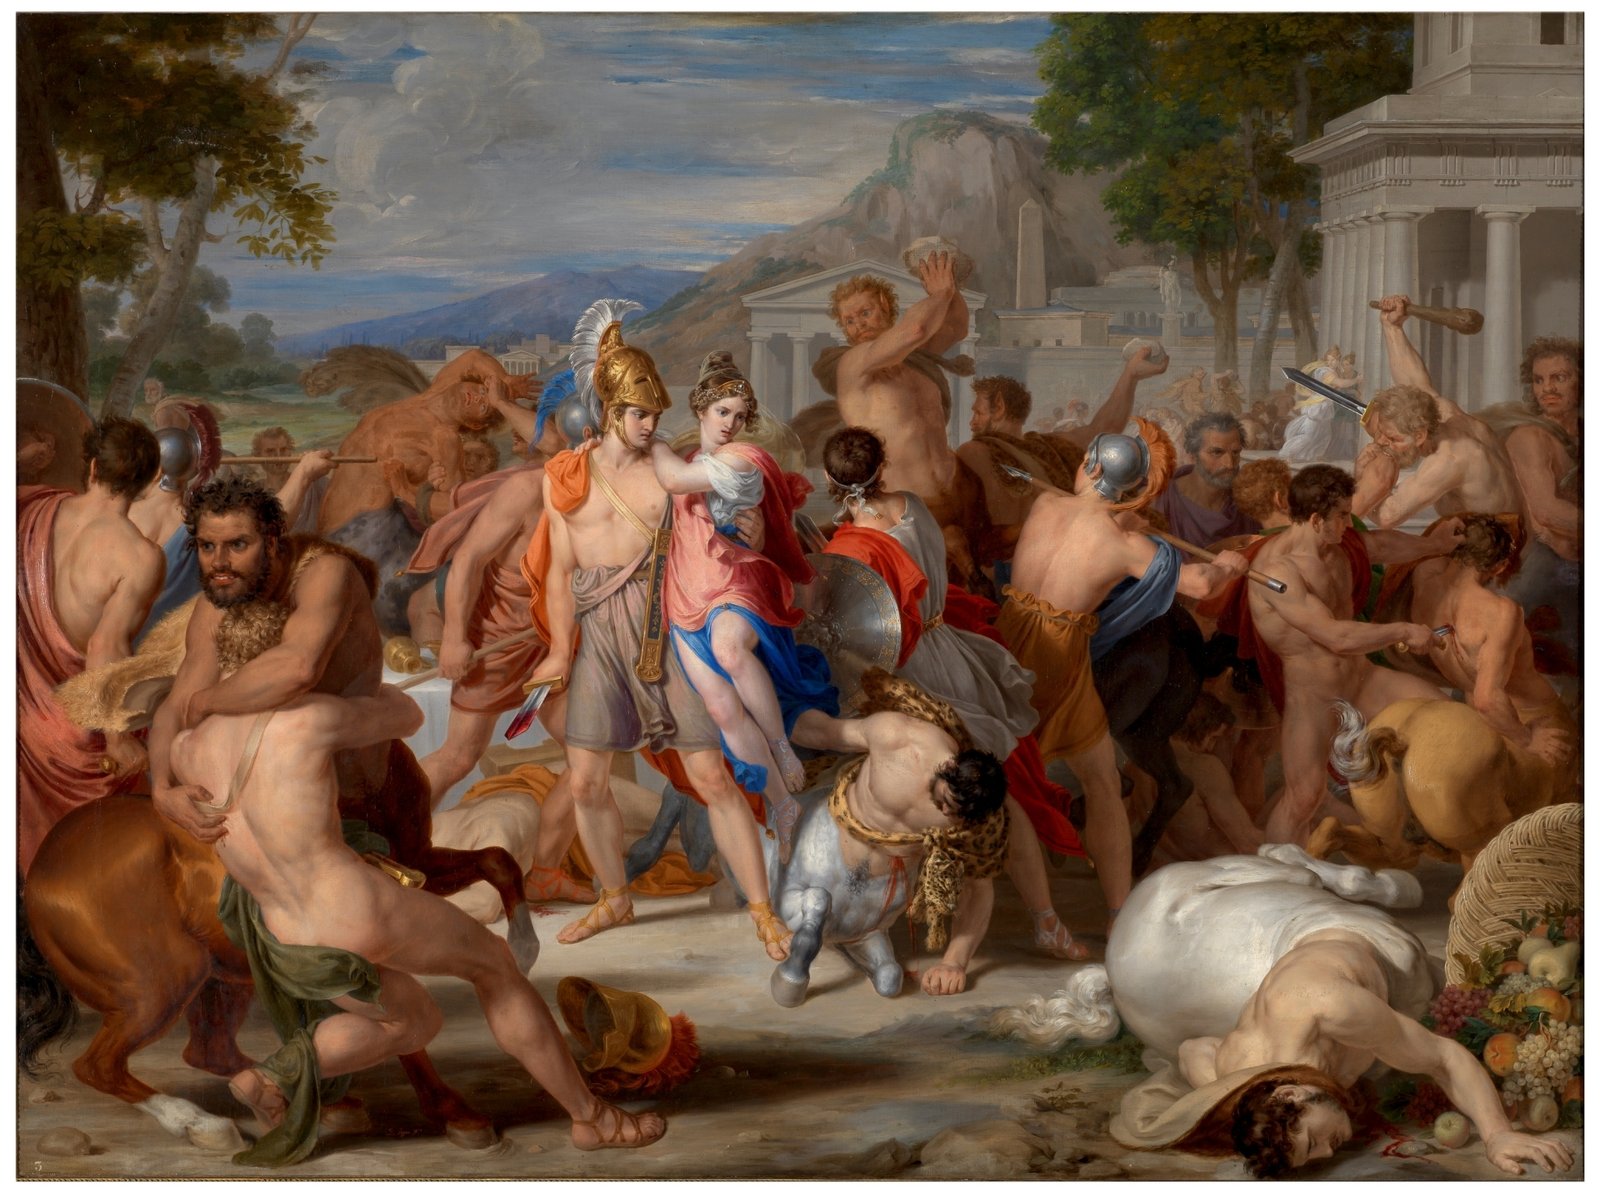 This painting represents the Lapiths and the Centaurs fighting against each other.